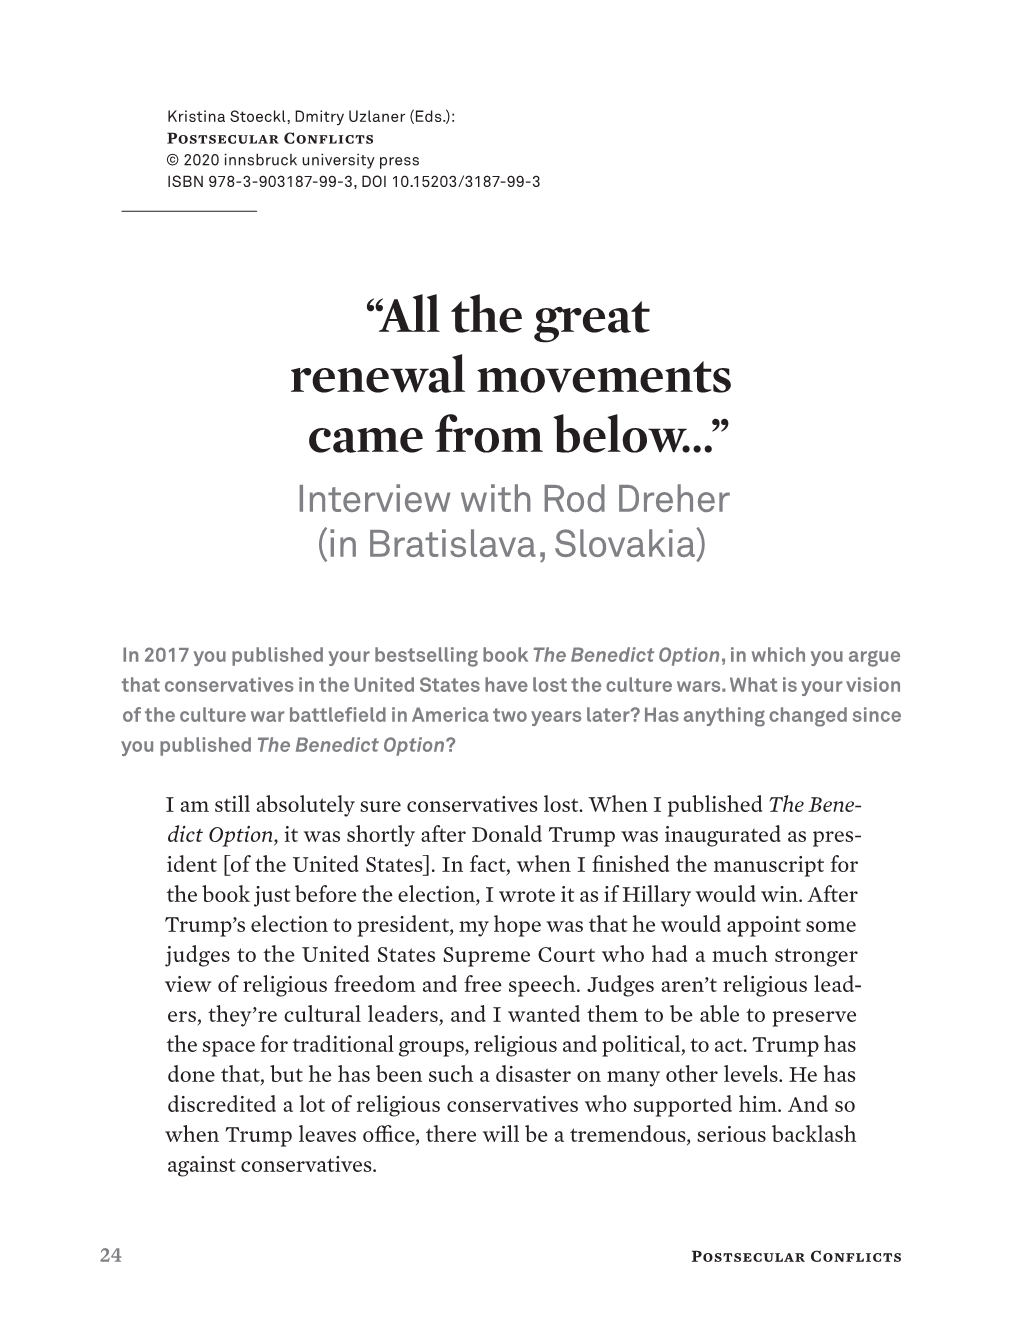 The Great Renewal Movements Came from Below…” Interview with Rod Dreher (In Bratislava, Slovakia)